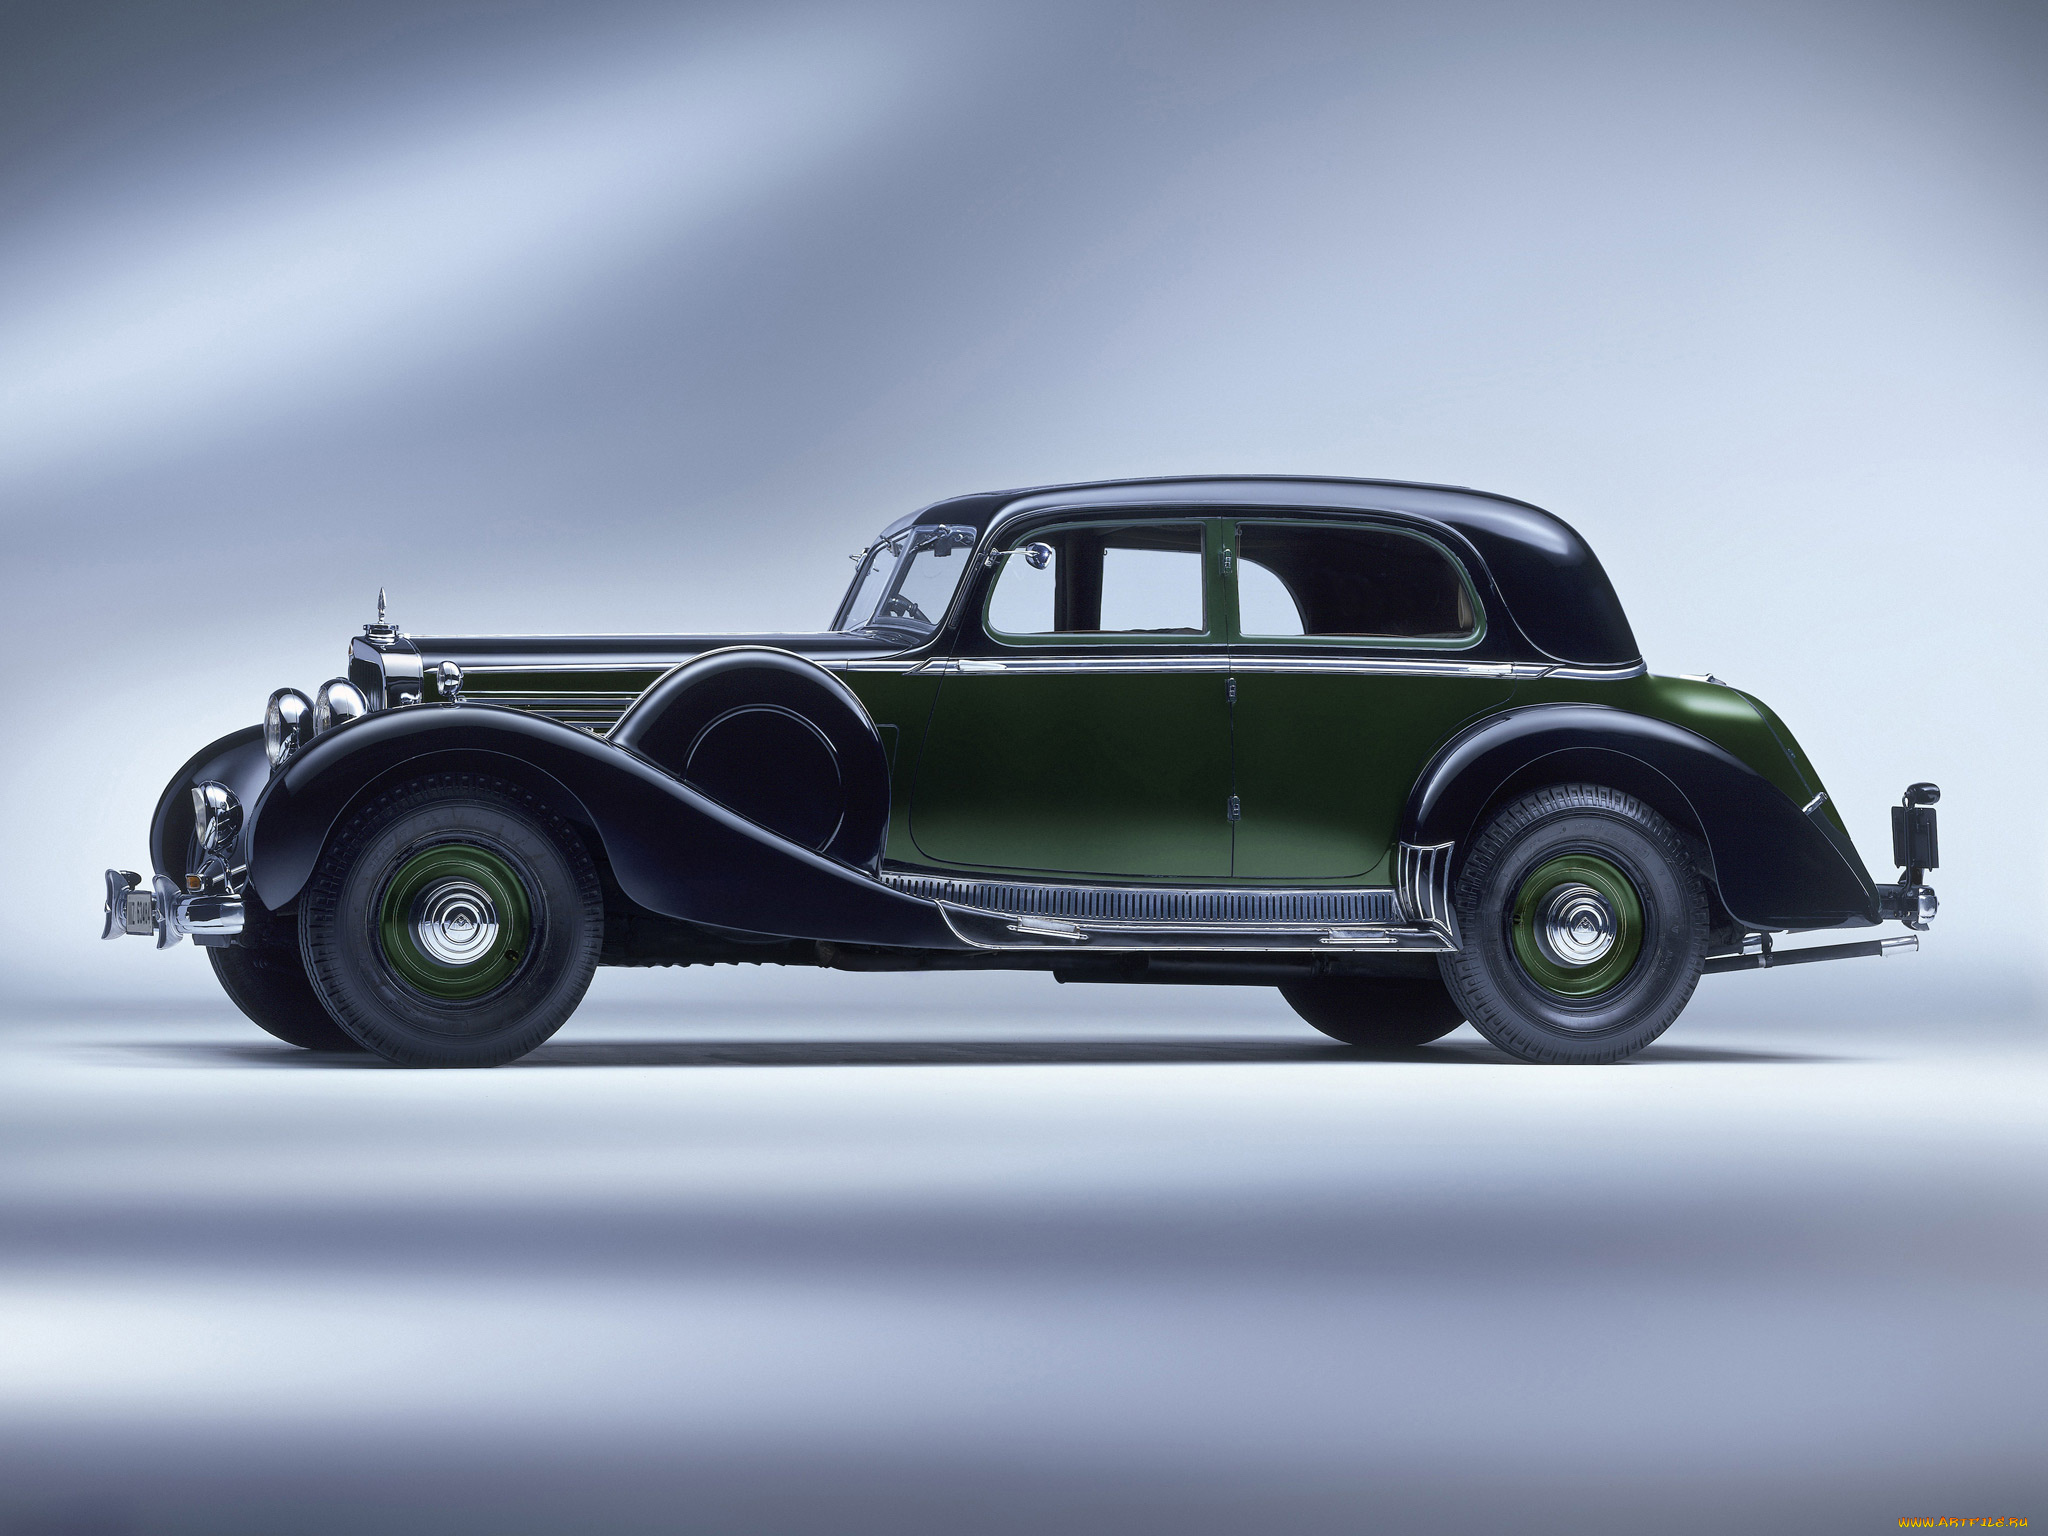 maybach, zeppelin, ds8, coupe, limousine, 1938, автомобили, классика, ds8, zeppelin, maybach, 1938, limousine, coupe